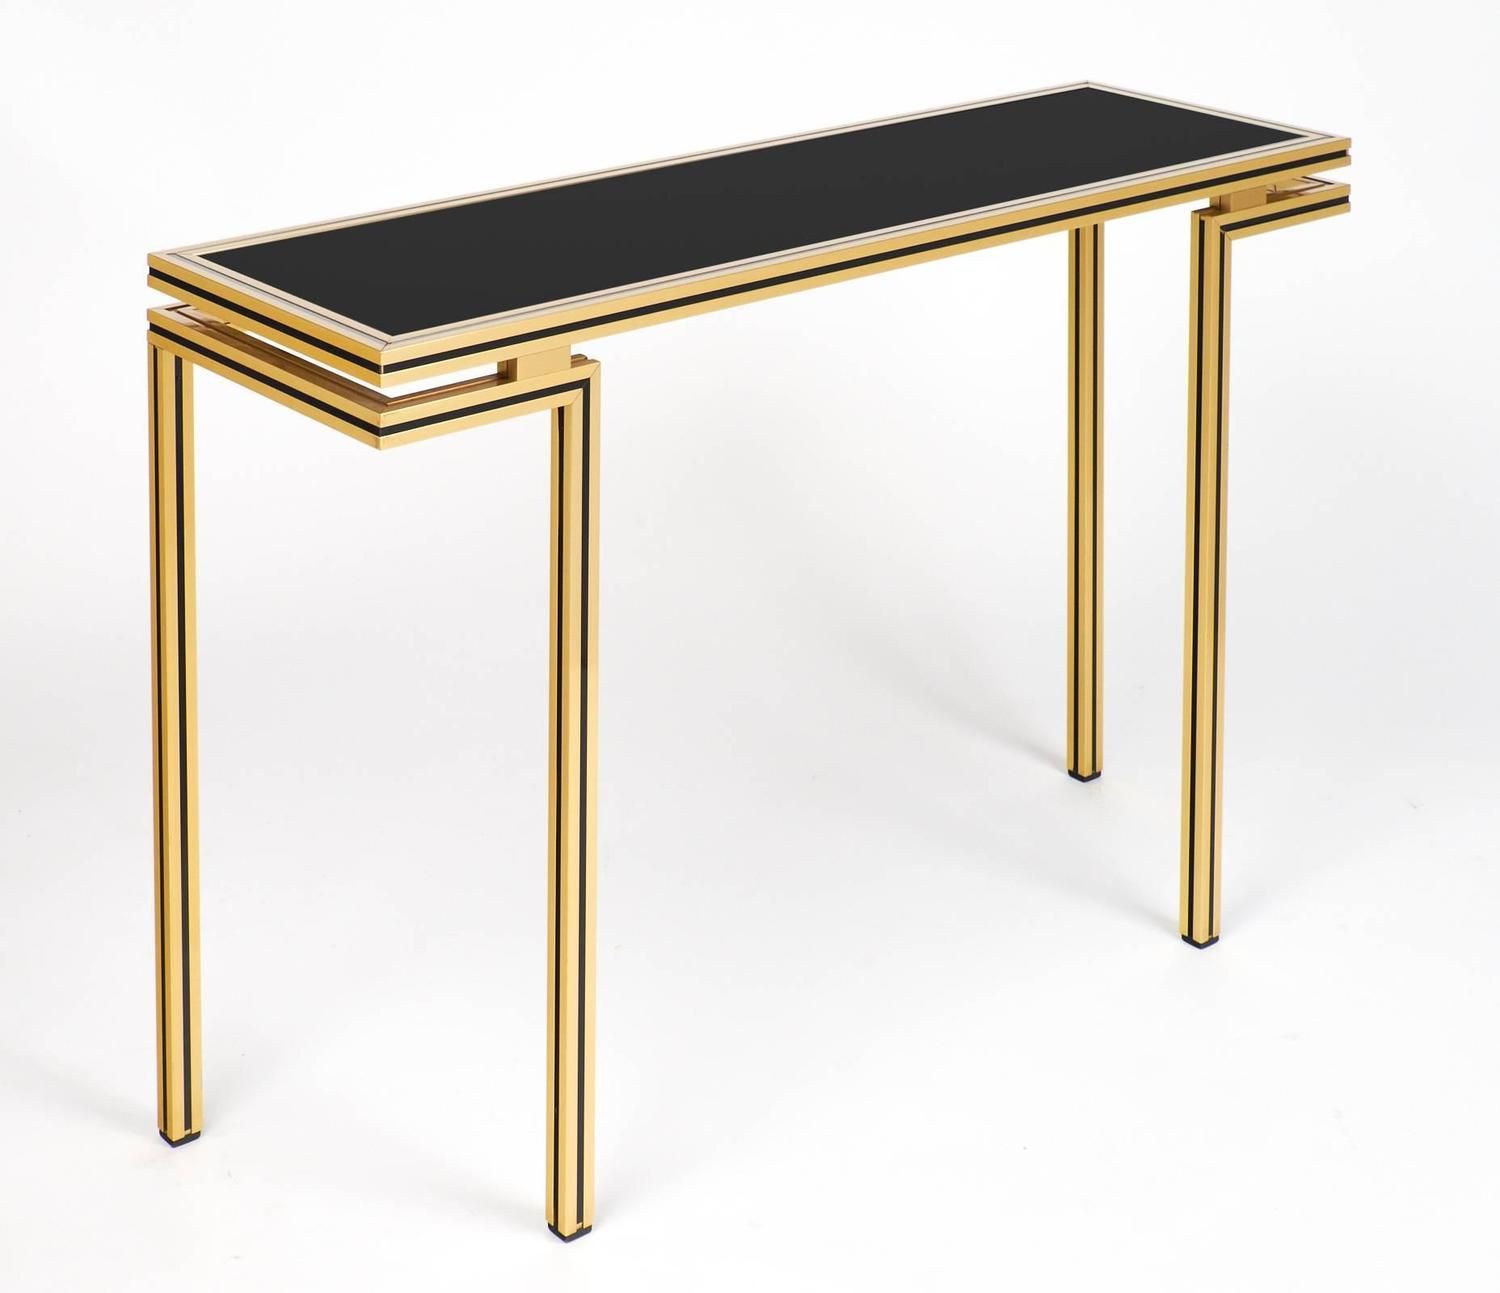 Vintage Black Glass Top Brass Console Tablepierre Regarding Black Round Glass Top Console Tables (View 4 of 20)